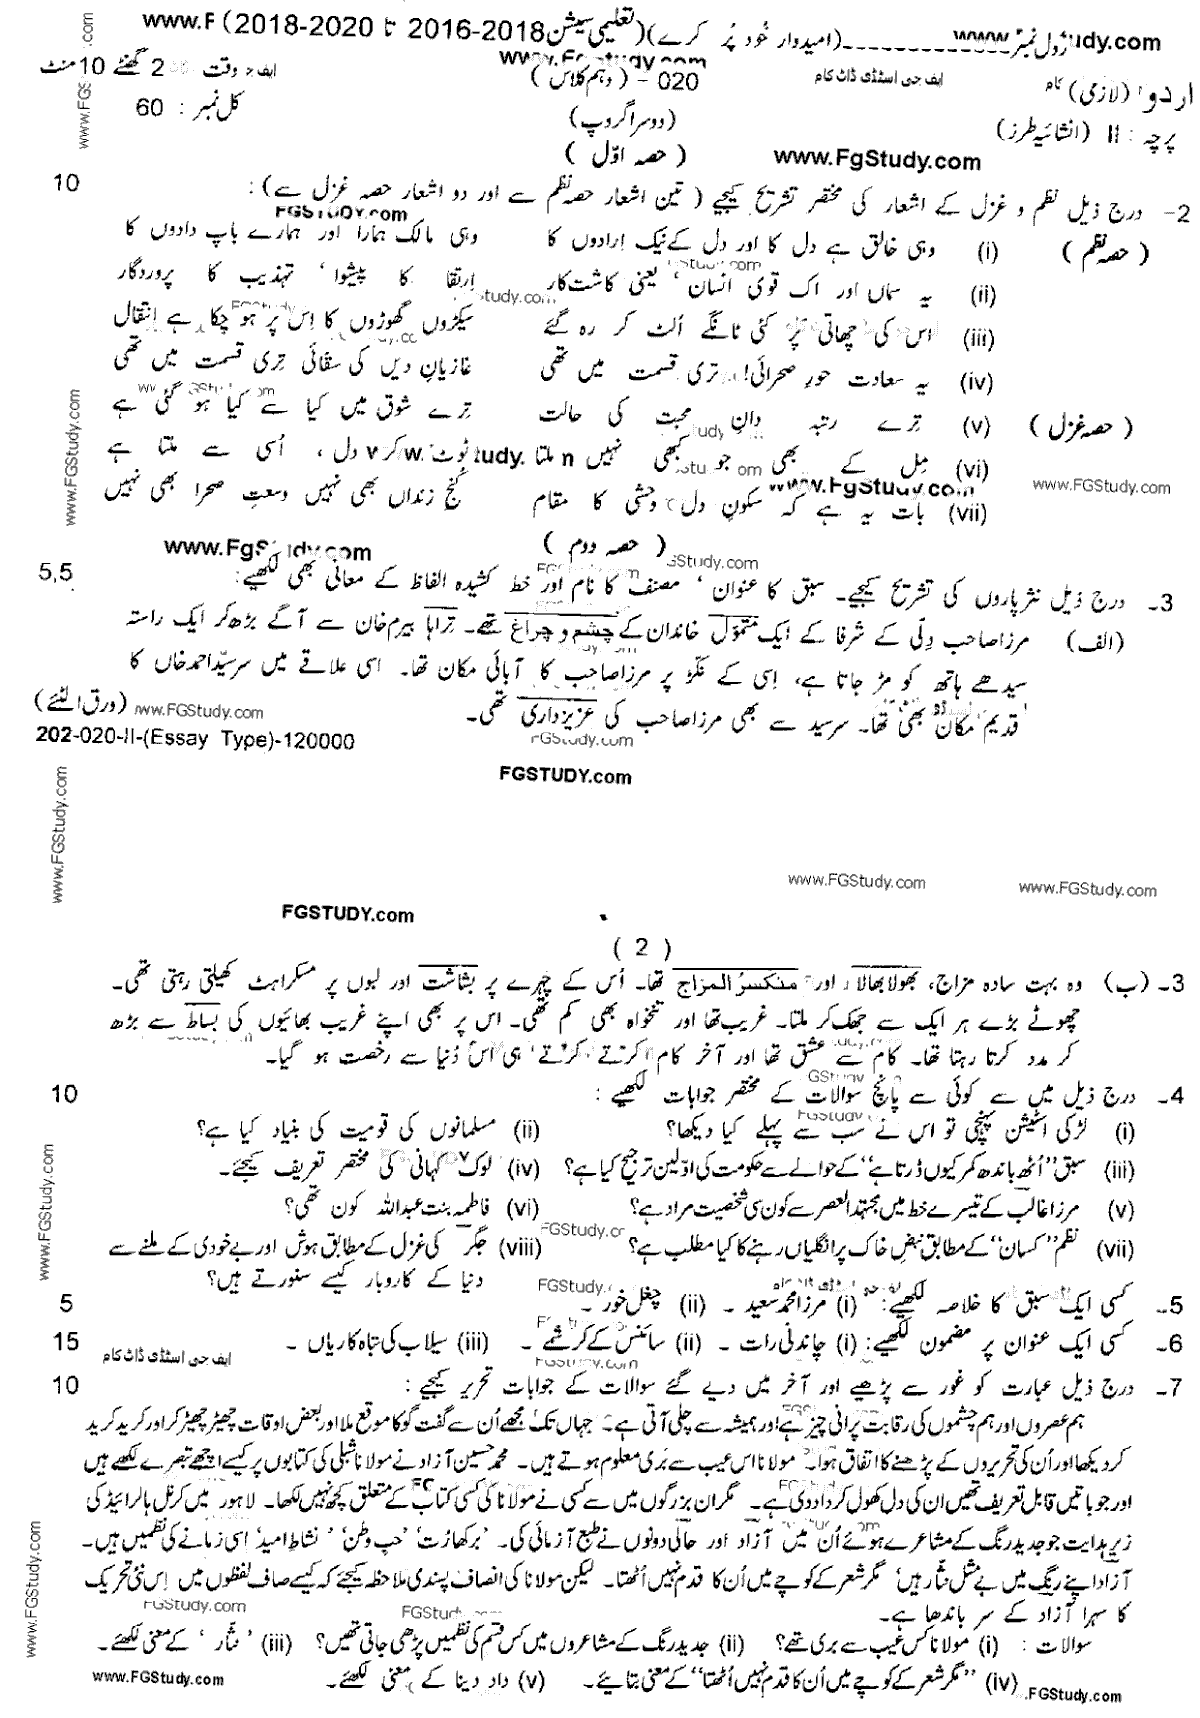 Urdu Group 2 subjective 10th Class Past Papers 2020